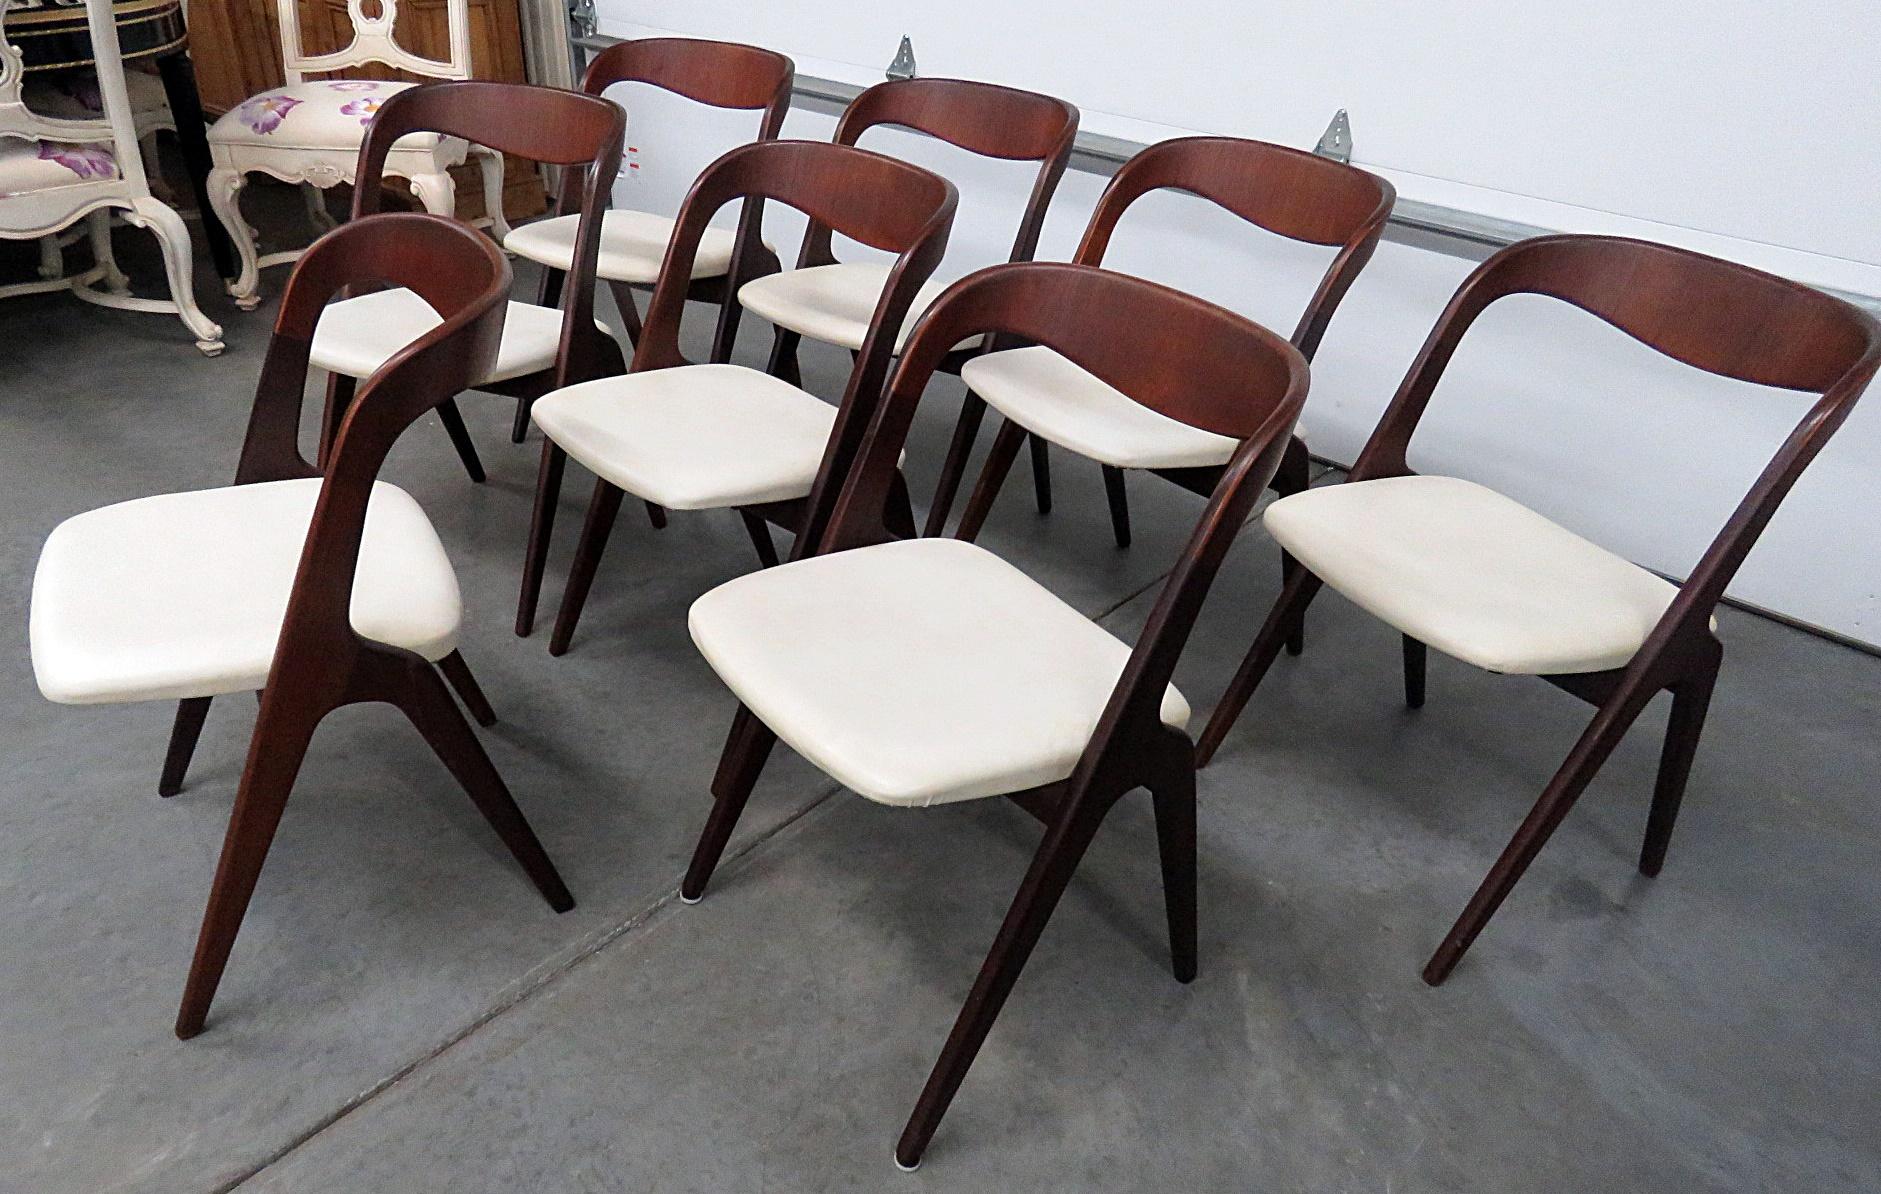 Set of 8 Danish Mid-Century Modern dining side chairs with Naugahyde upholstery.